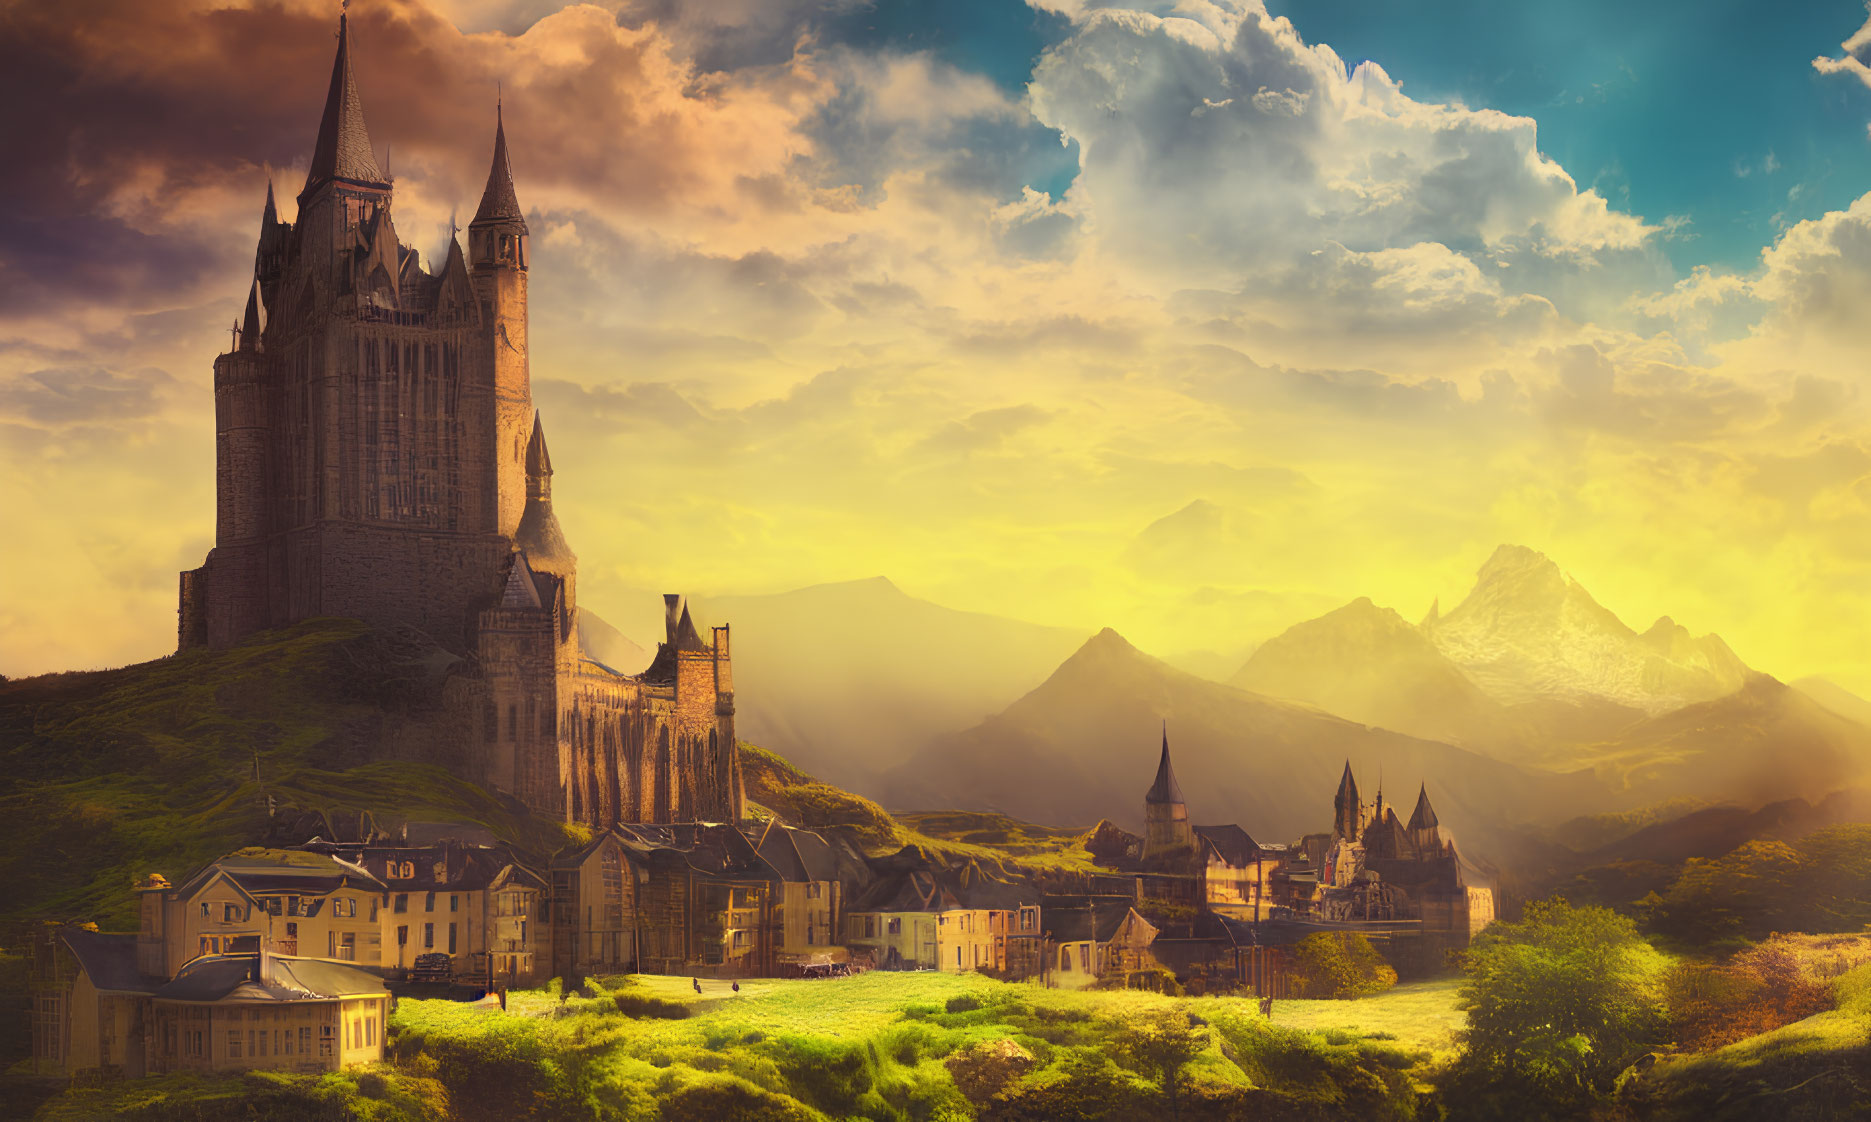 Majestic castle on hill with buildings, mountains, and golden sunset sky